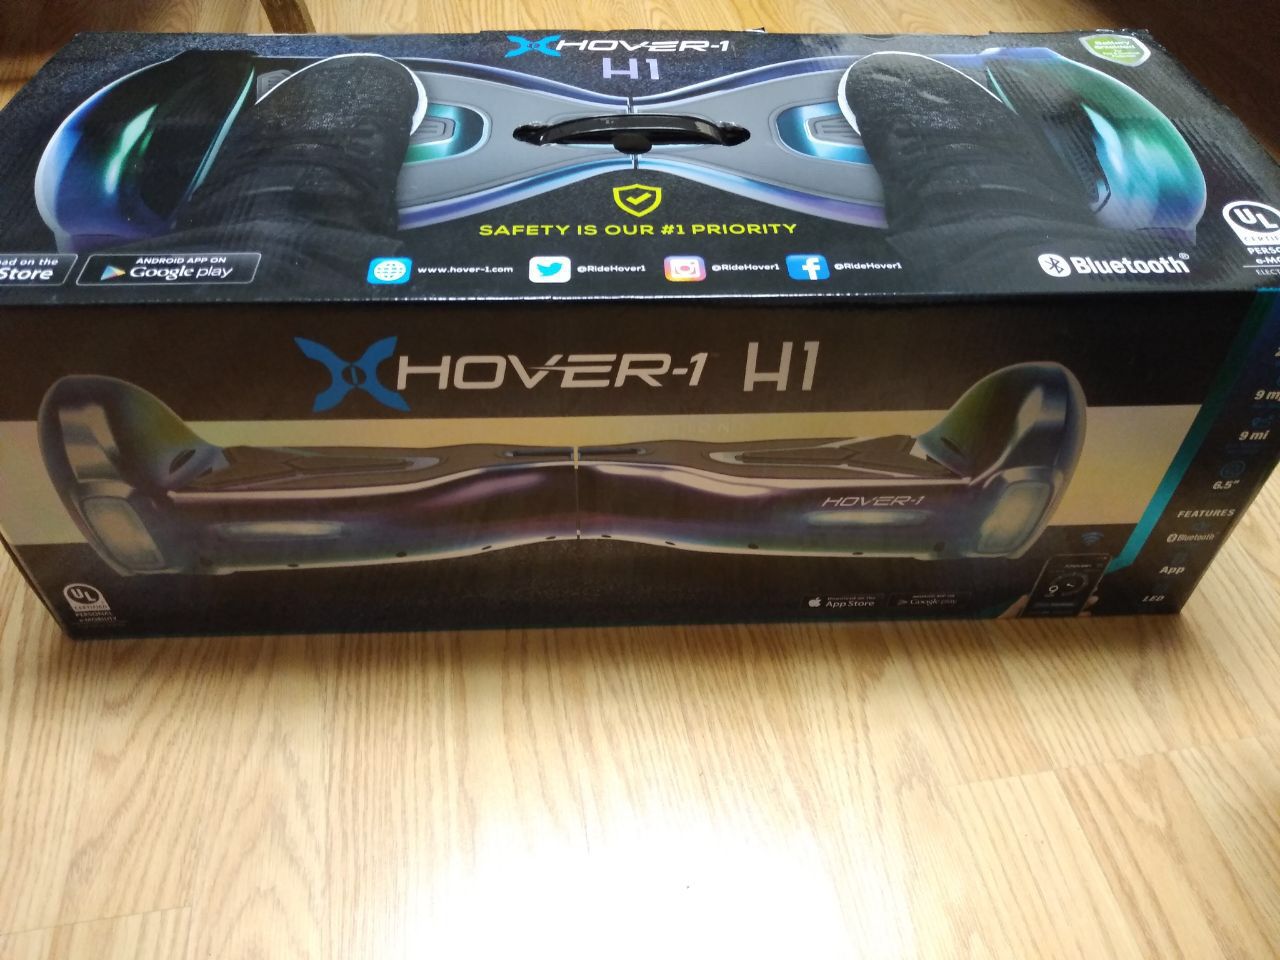 Brand new Hover-1 hoverboard